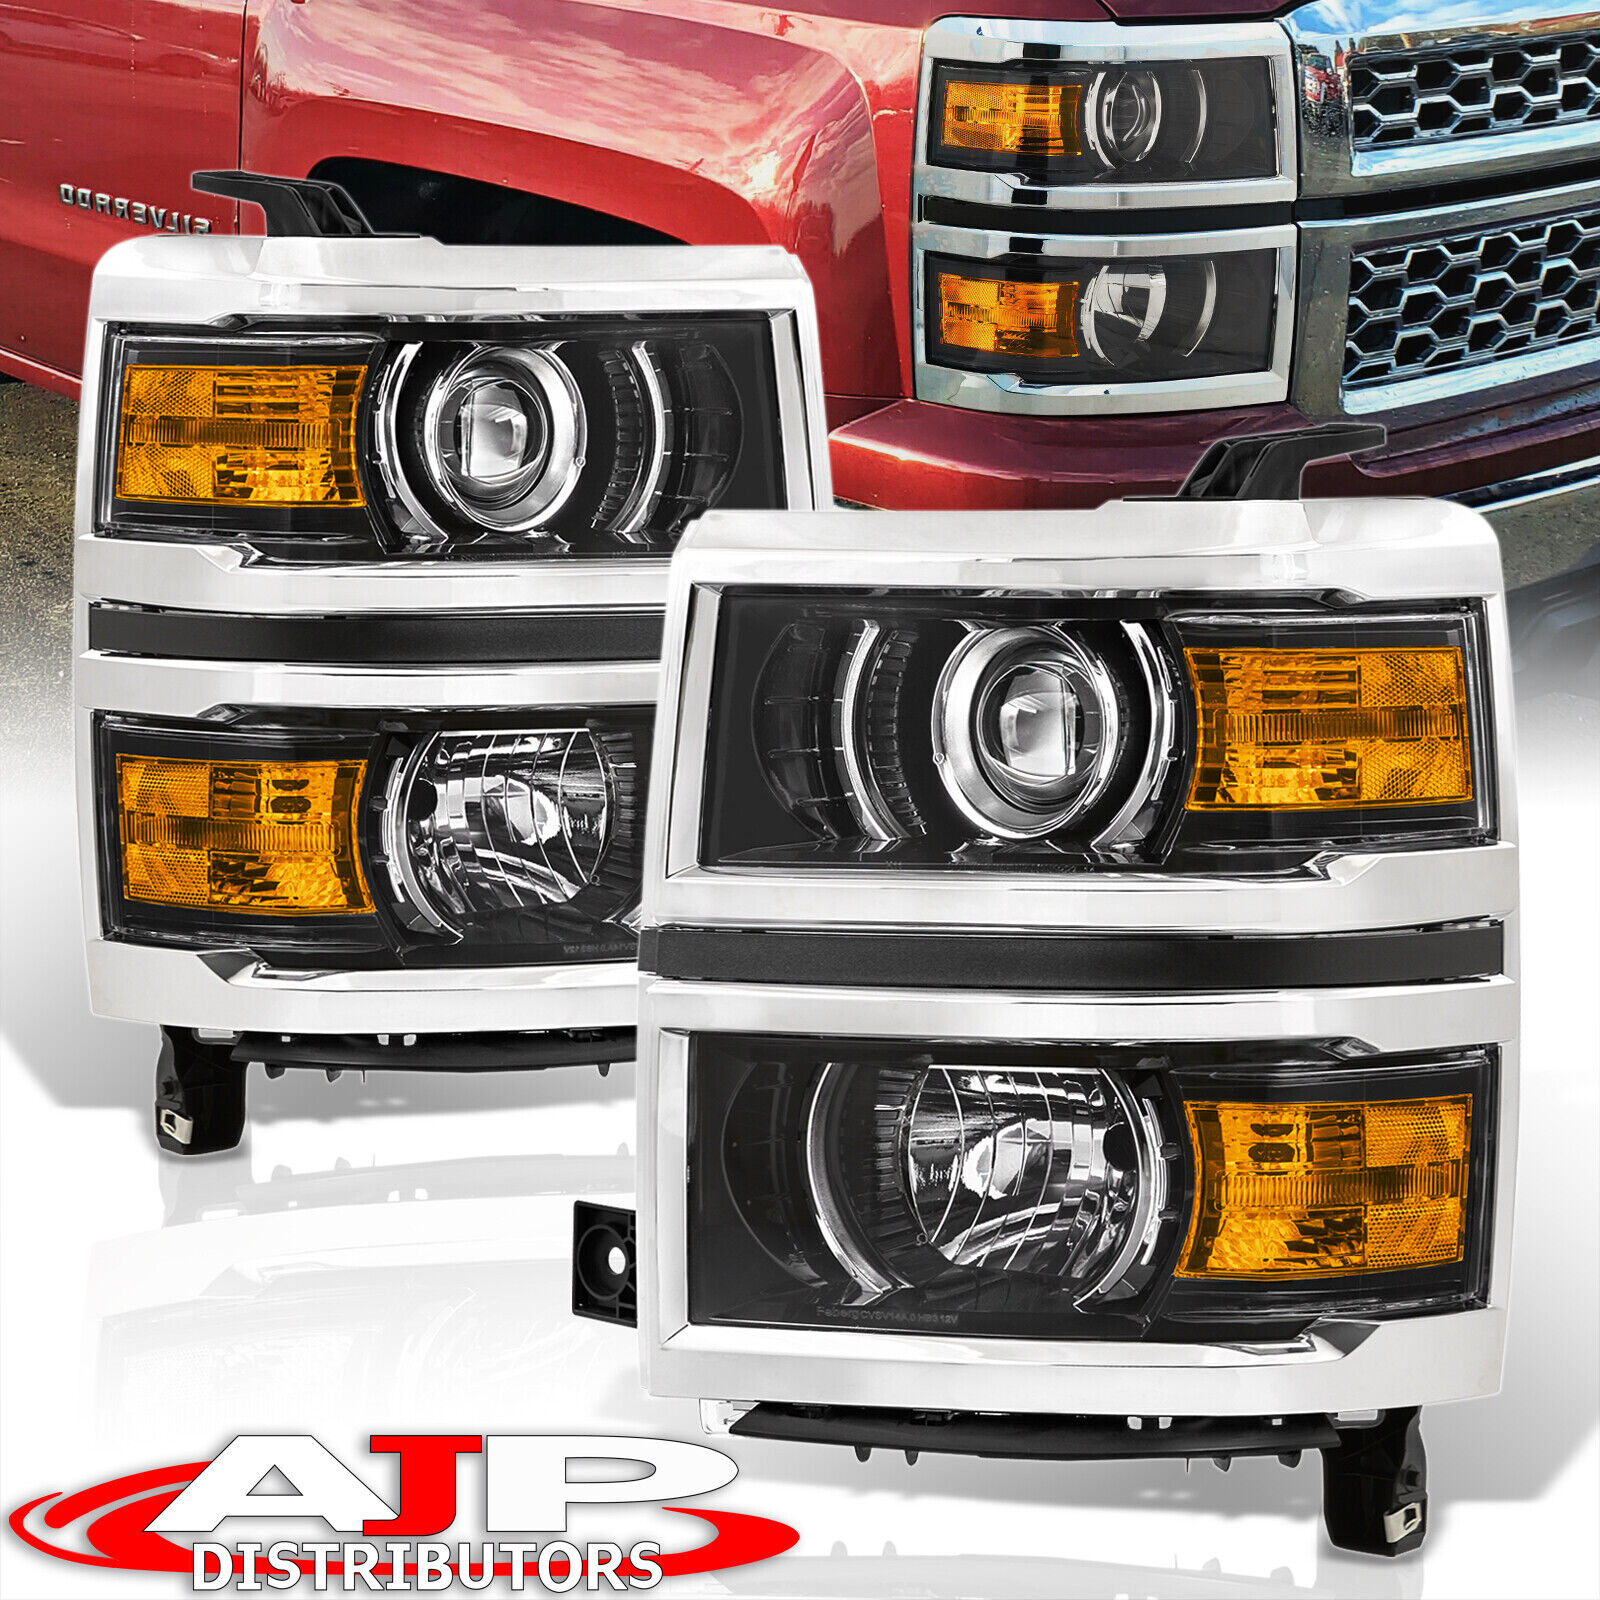 Black OE Style Projector Head Lights Lamps For 2014-2015 Chevy Silverado 1500